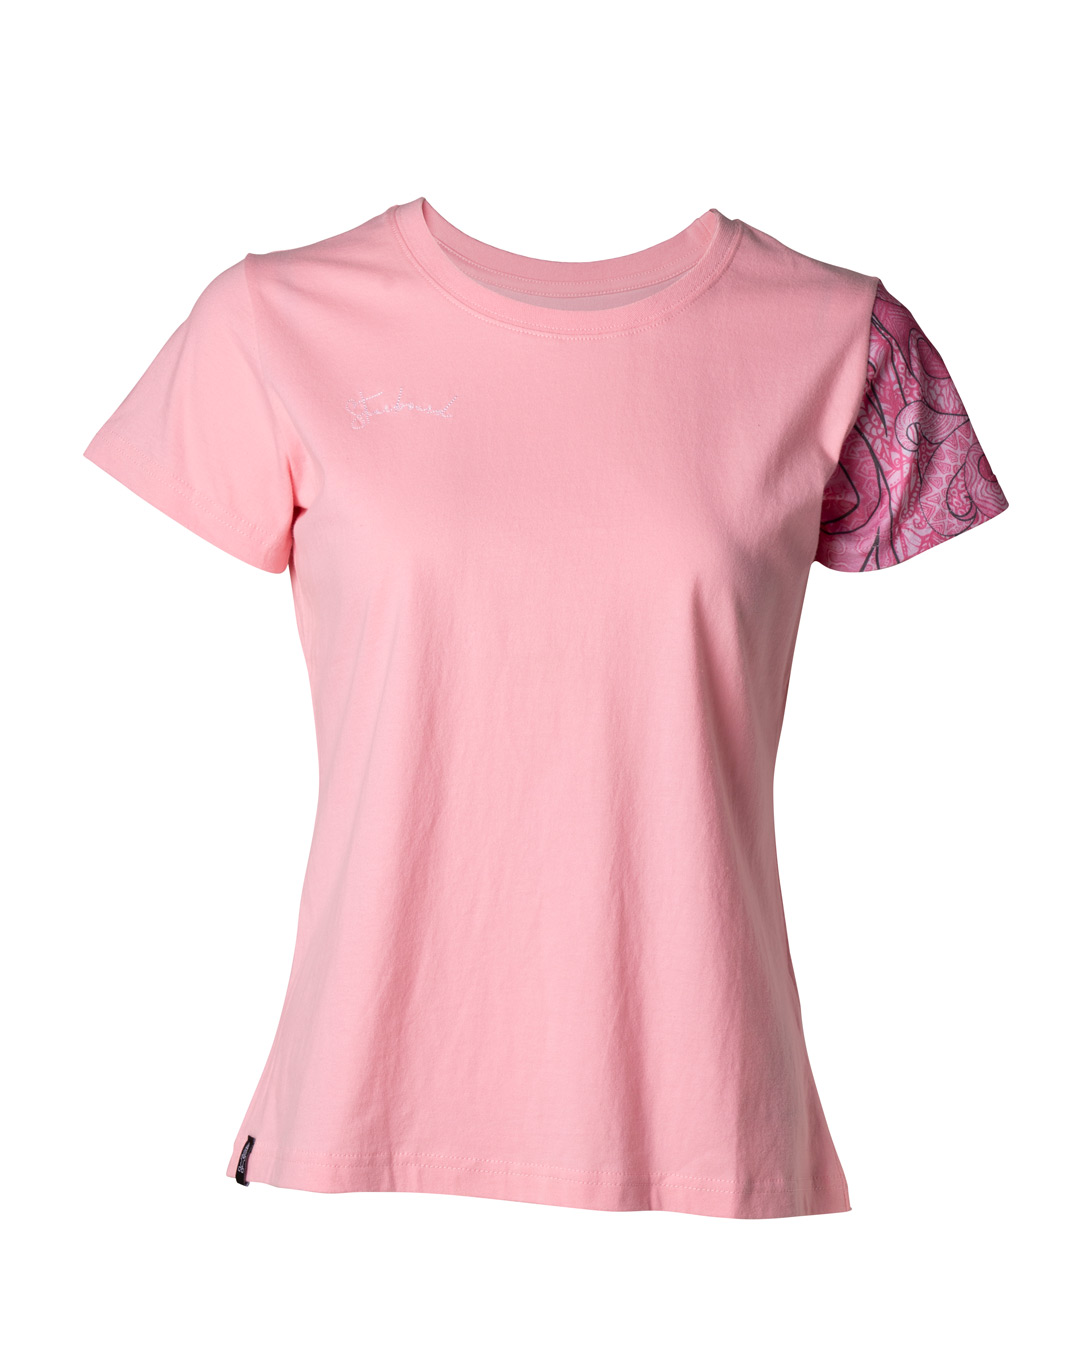 2022-Starboard-Girls-Sonni-Tee-Crepe-Pink-Front